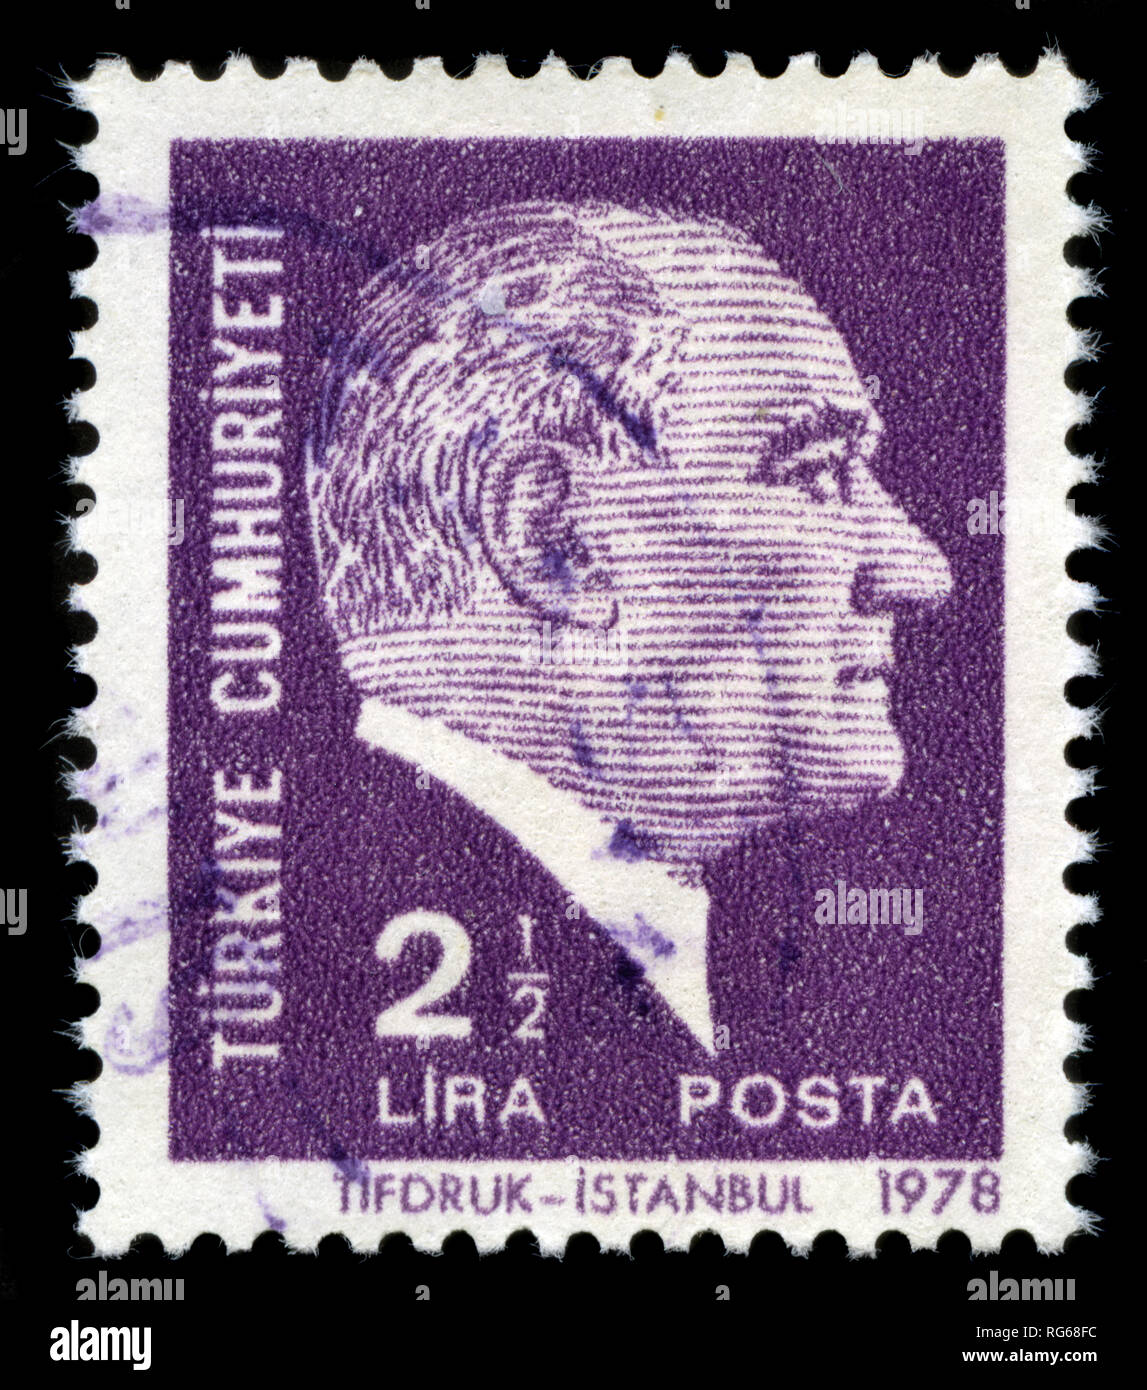 Postage stamp from Turkey in the Definitive Postage Stamps, 1978, Ataturk series Stock Photo